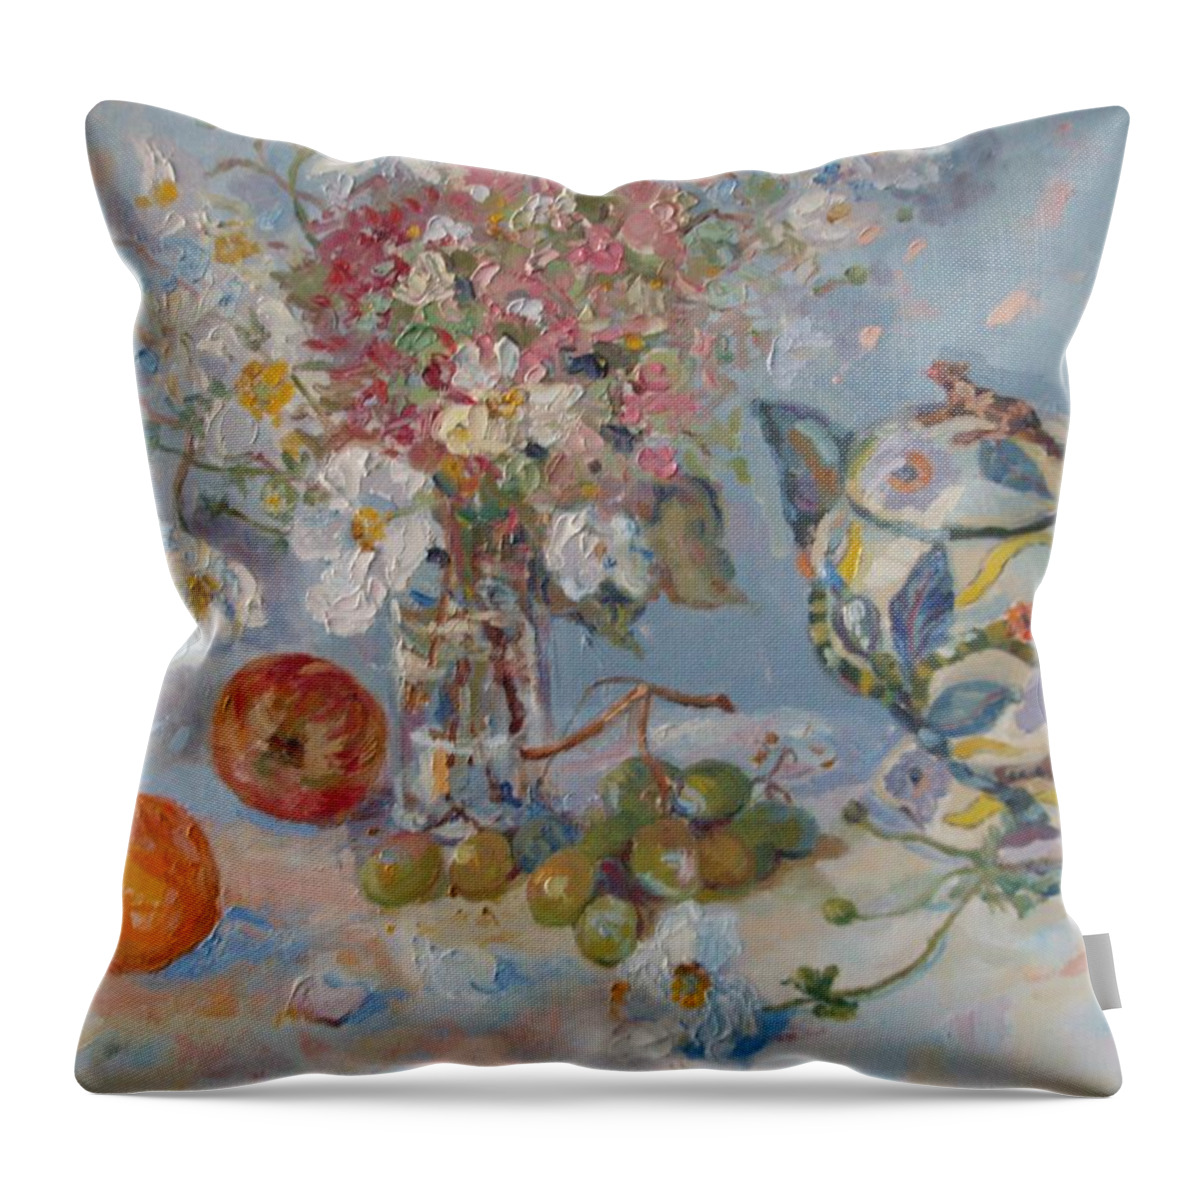 Still Life Throw Pillow featuring the painting Flowers with Tangerine and Ardmore Jar by Elinor Fletcher